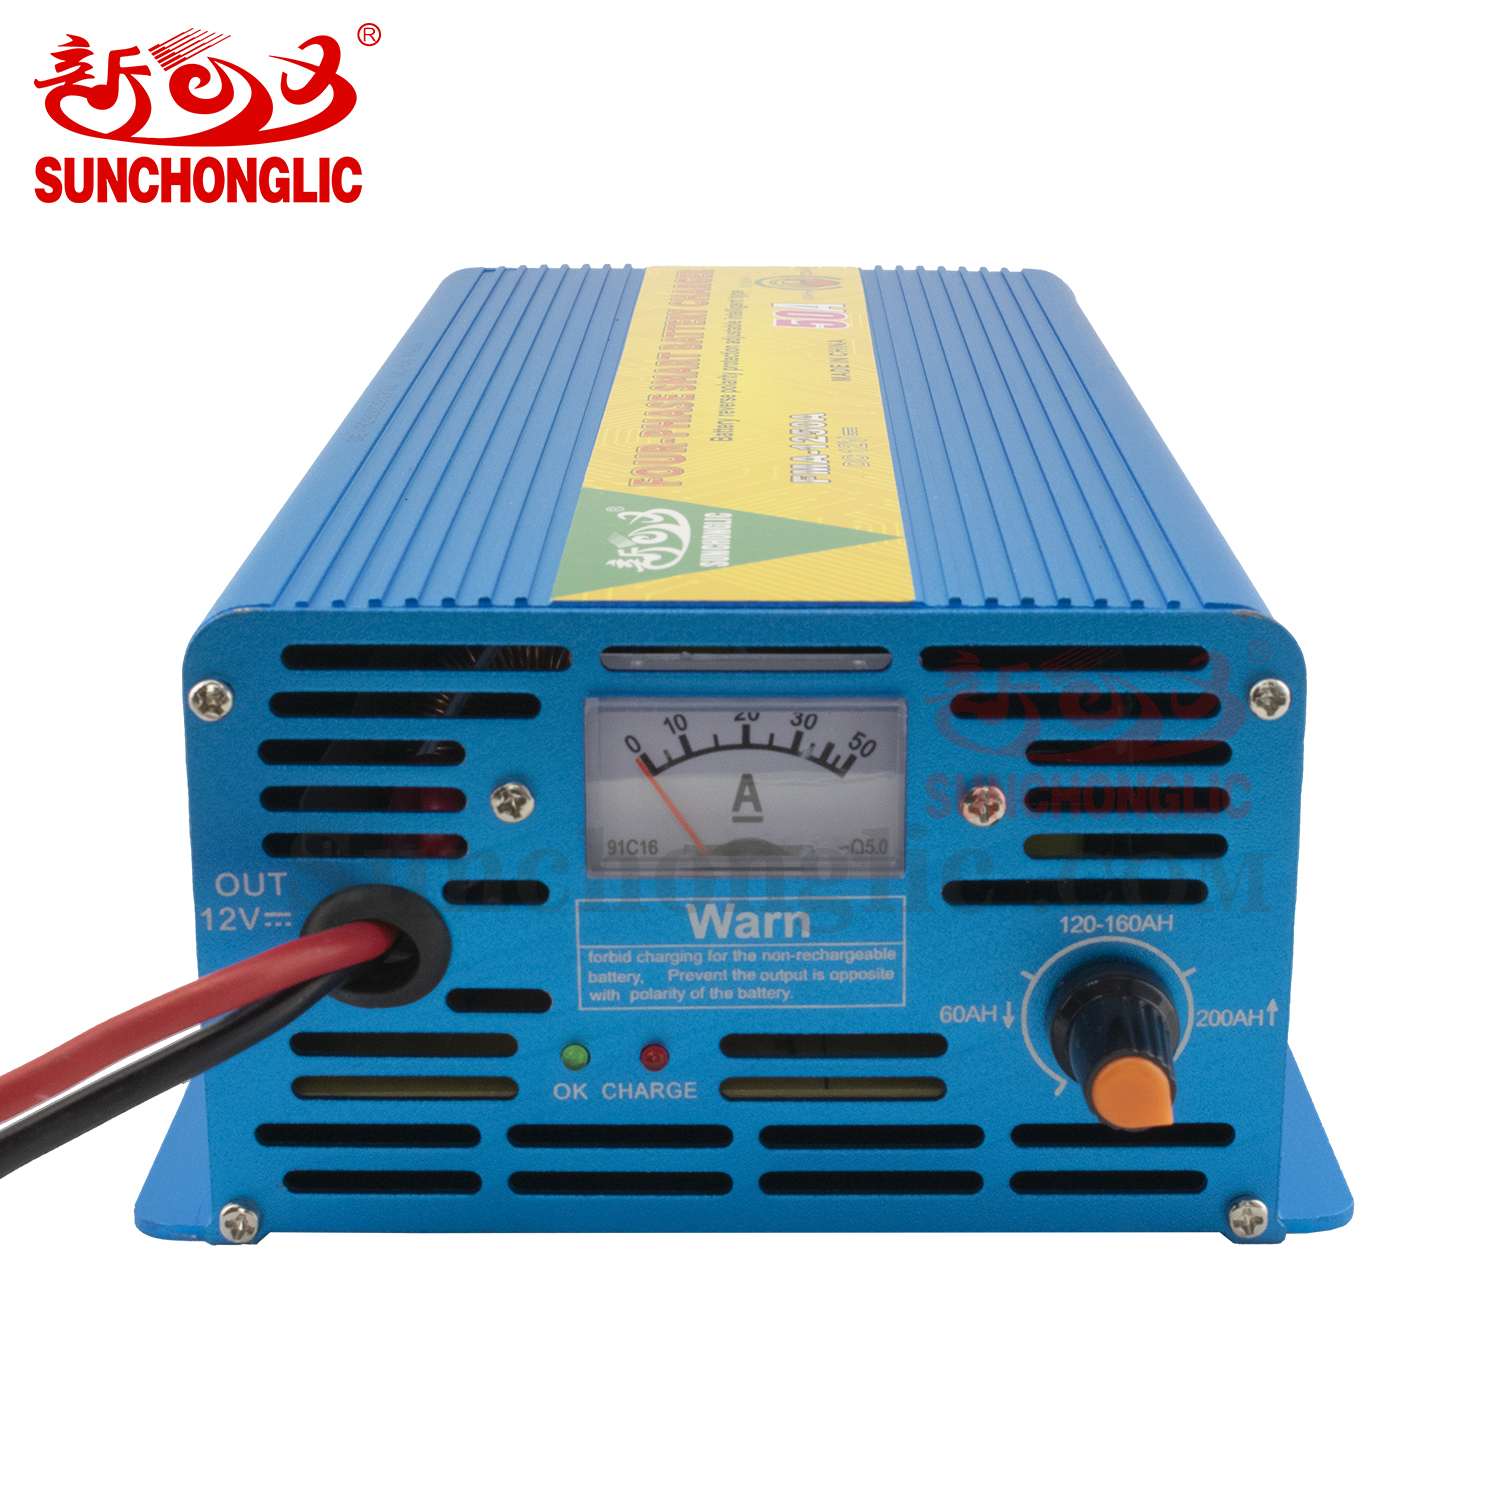 AGM/GEL Battery Charger - FMA-1250A